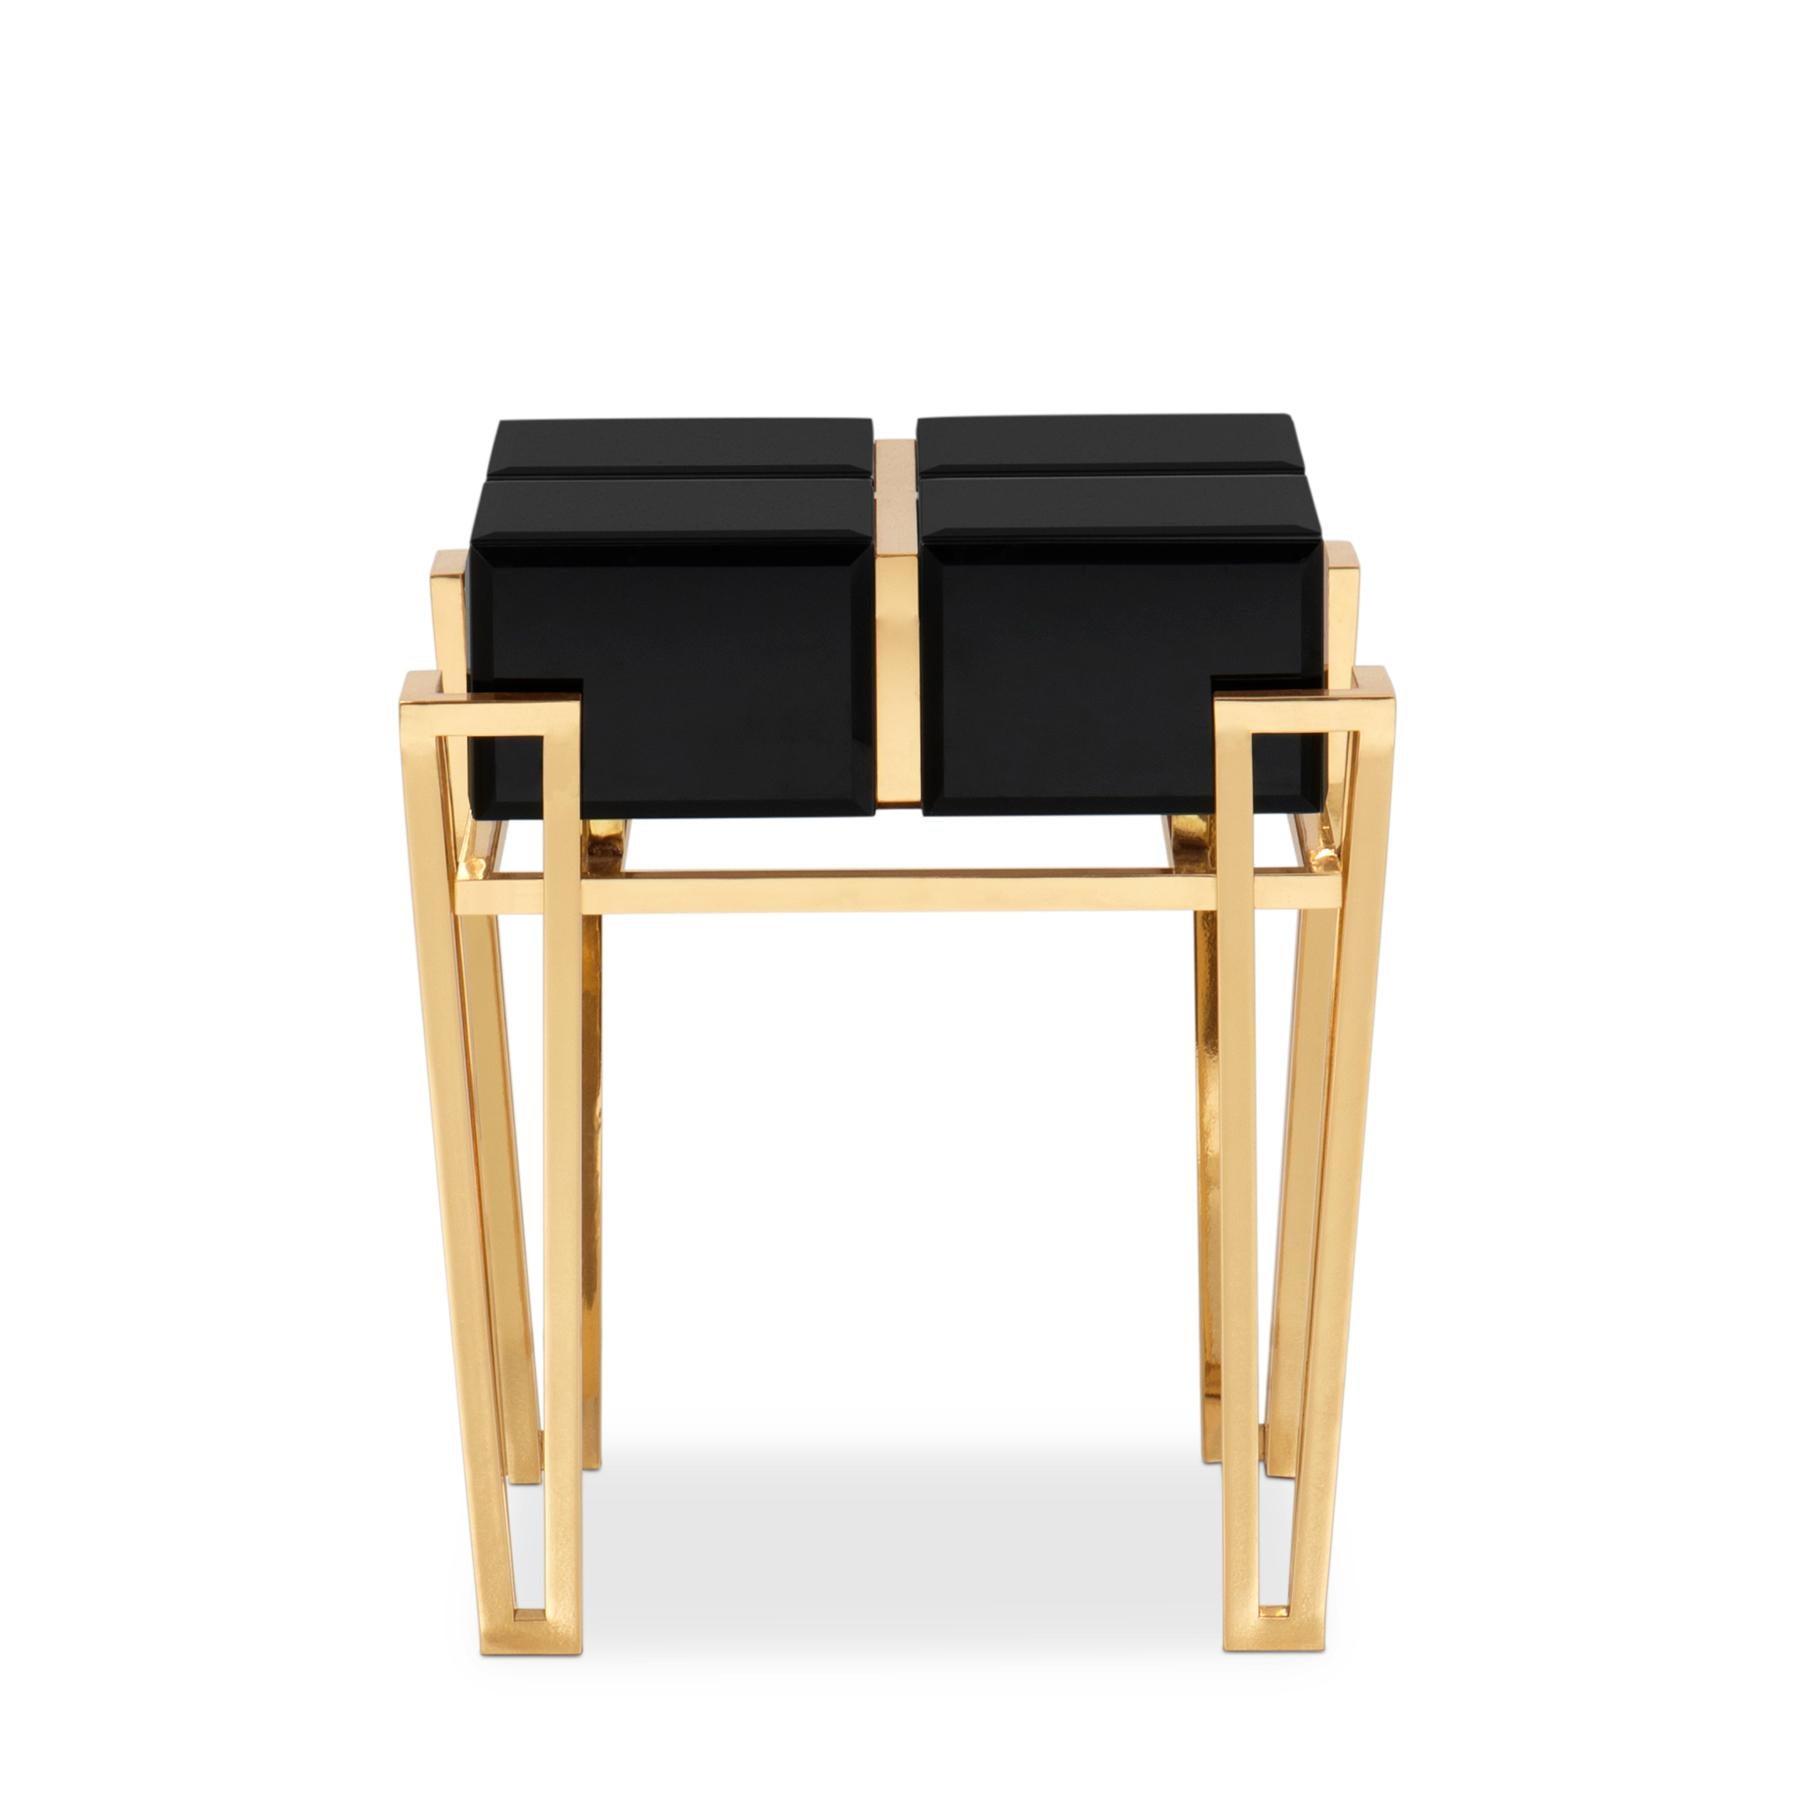 Side table Williams with solid brass structure in polished
brass, with wooden body covered with blackened glass top.
   